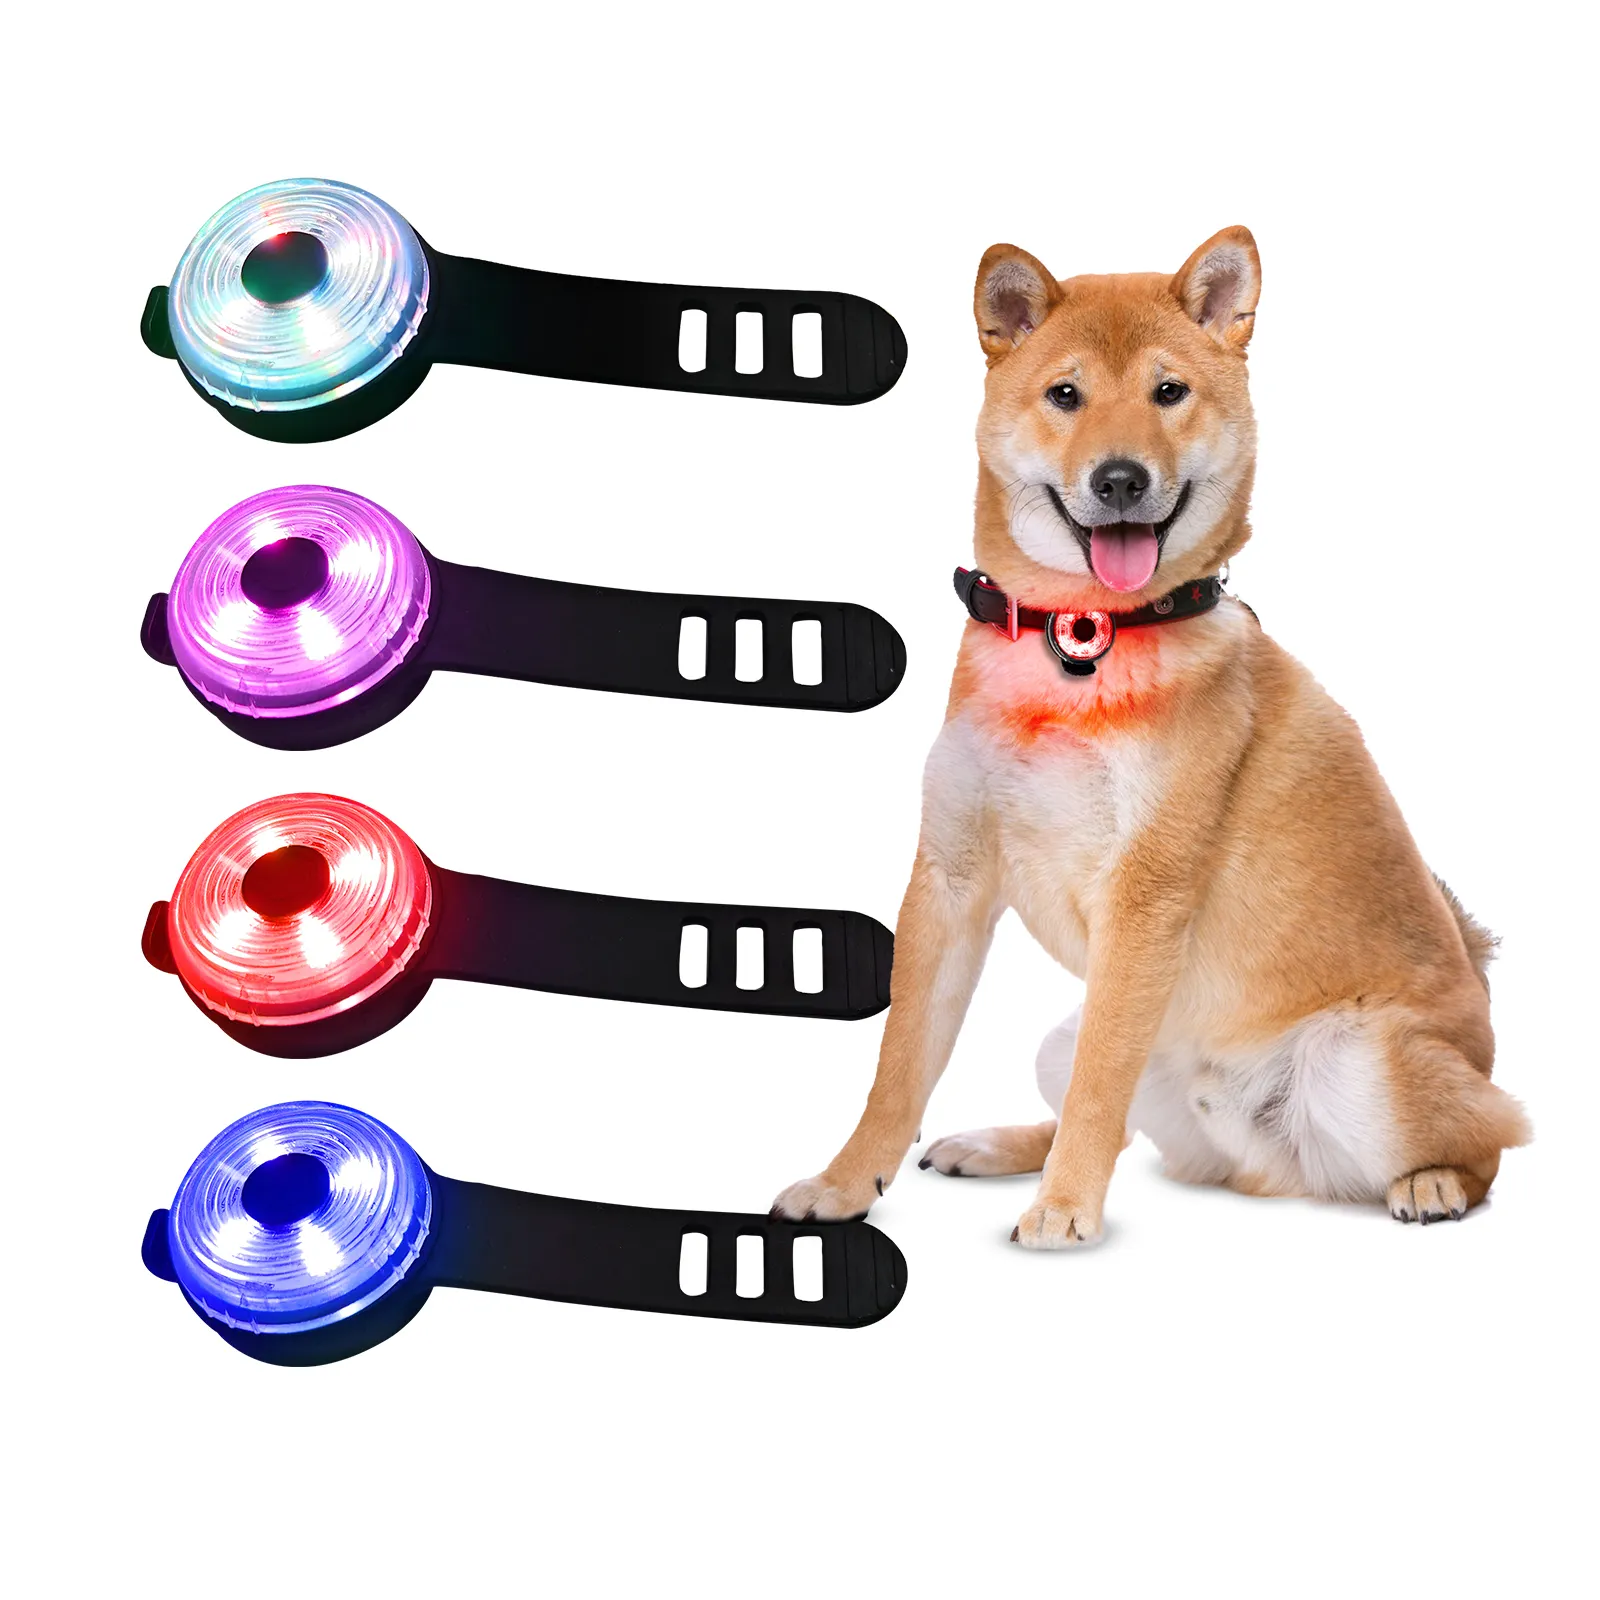 UMIONE New Pet Supplies Products Dog Accessories LED Light Dog Collar Light Pet Safety Tag Pendant Dog Light